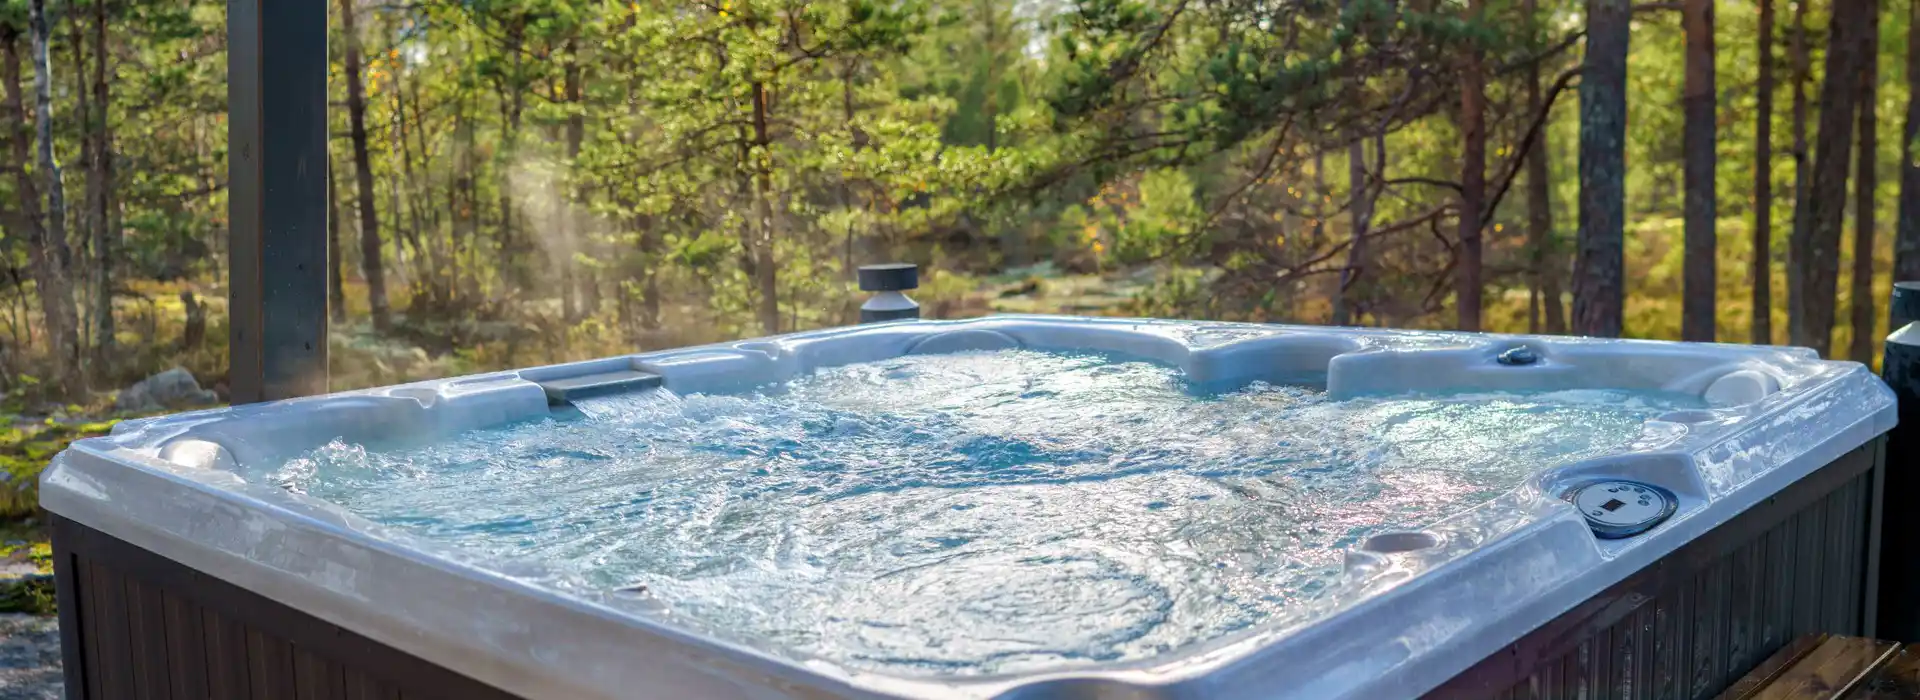 Glamping with hot tubs in the West Midlands